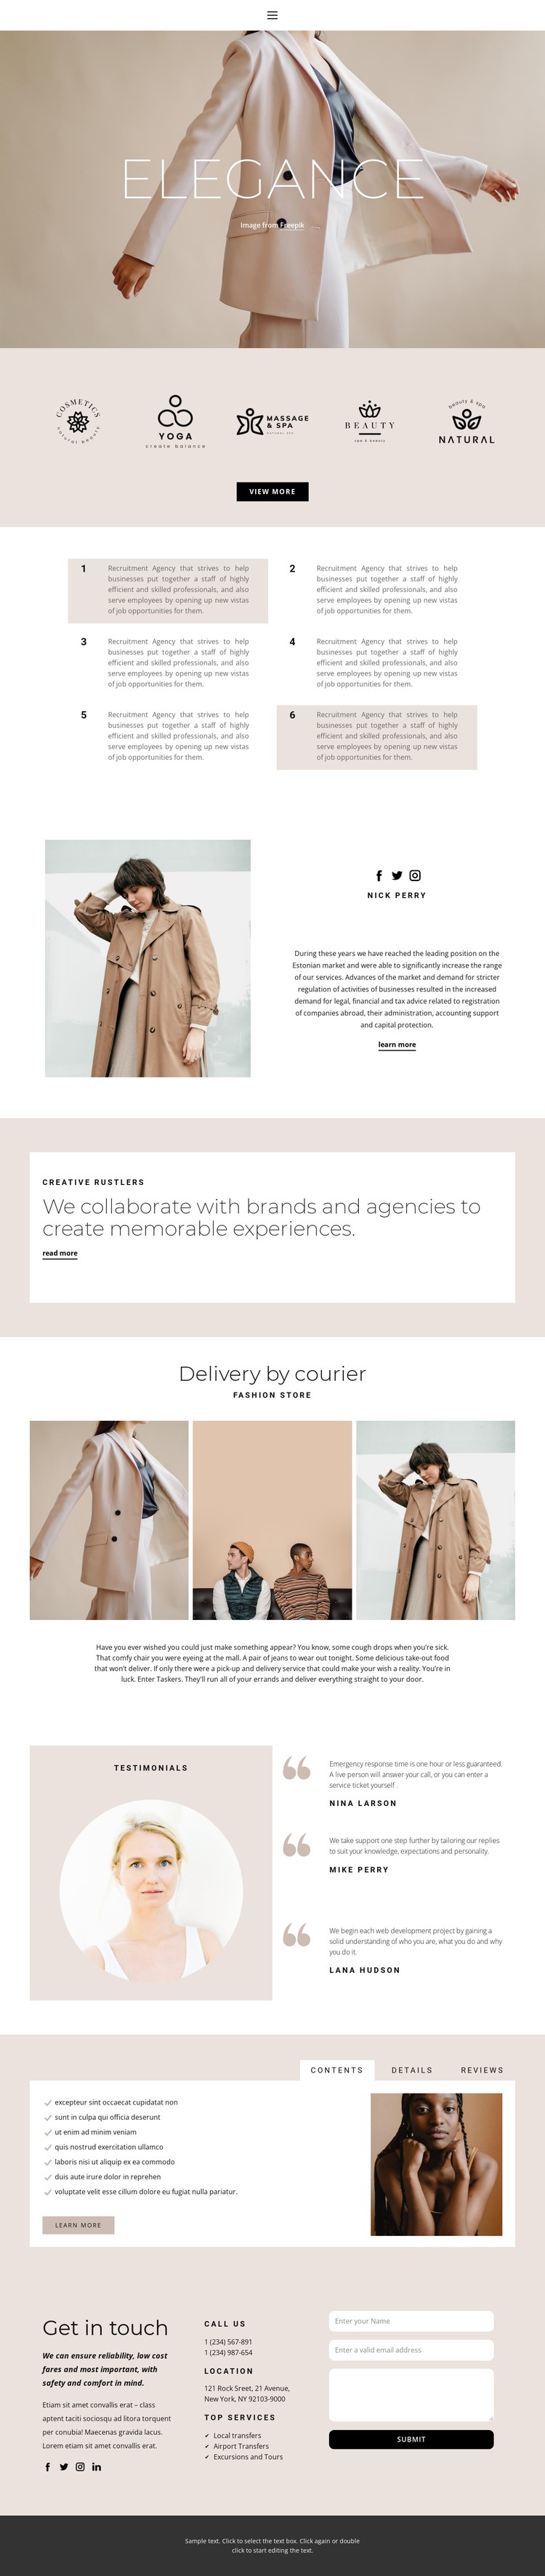 Elegance in fashion CSS Template